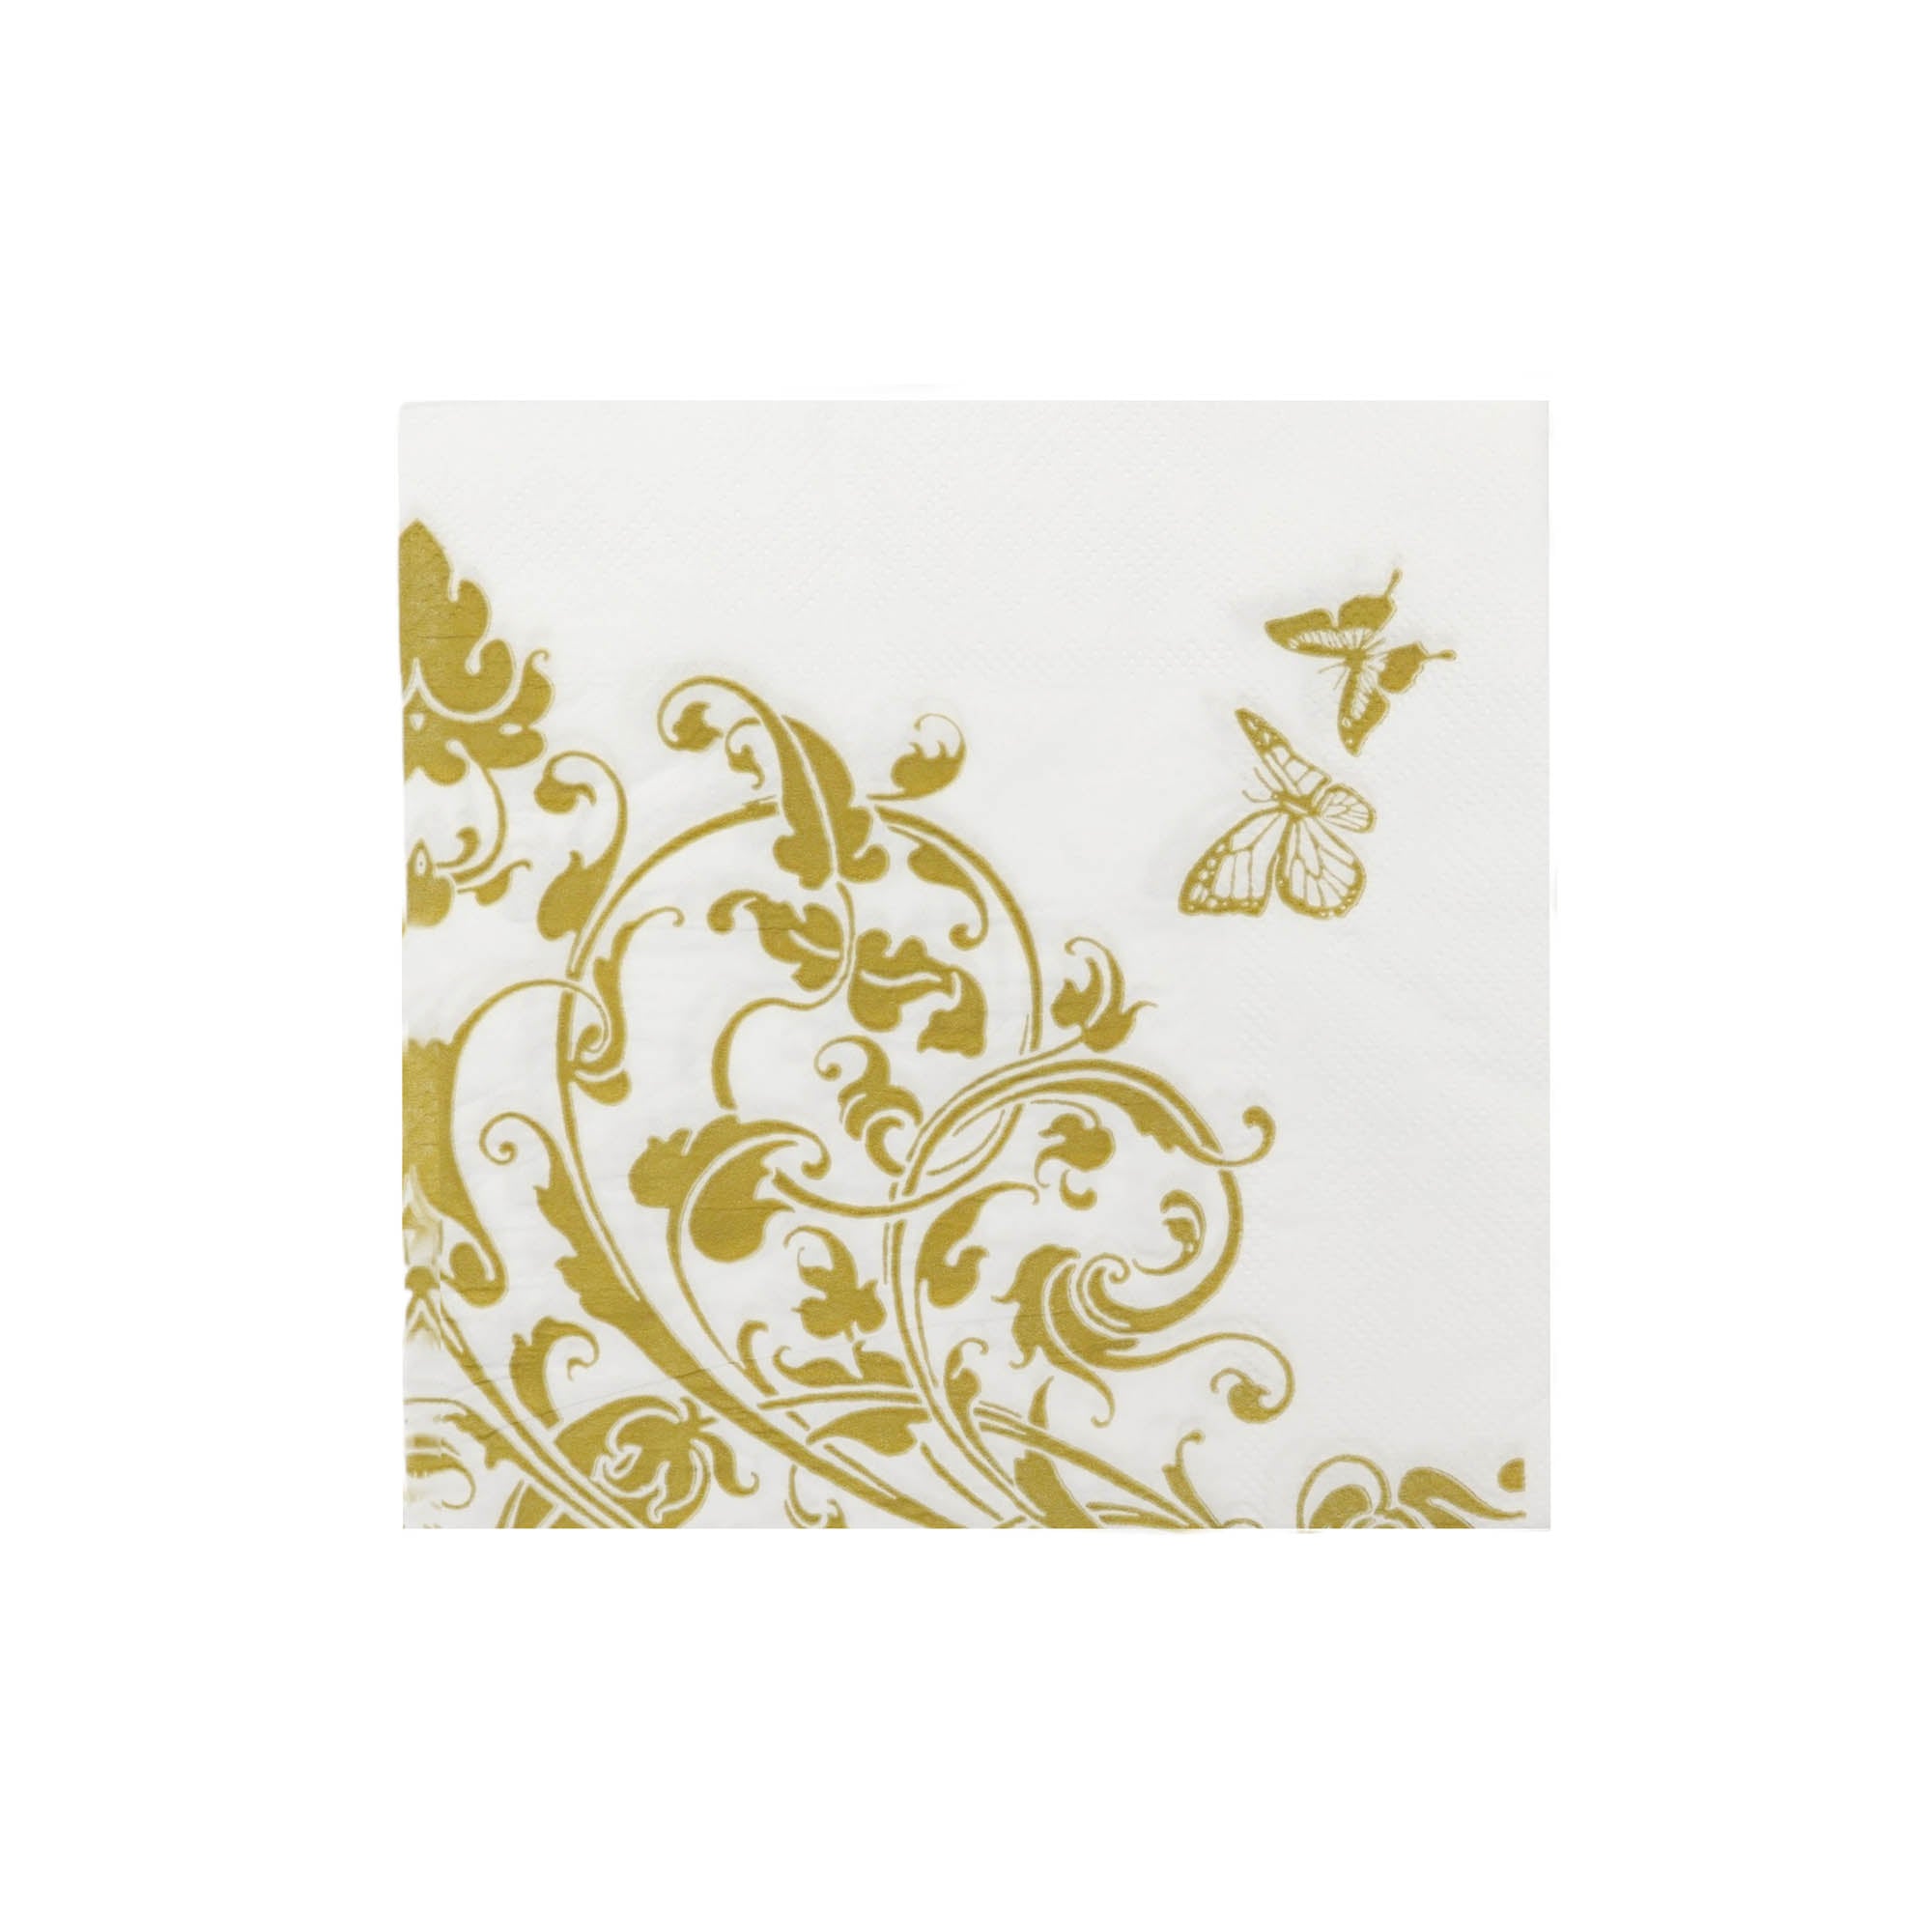 Luncheon Designer Serviette White with Gold Silver Floral Print 10pack